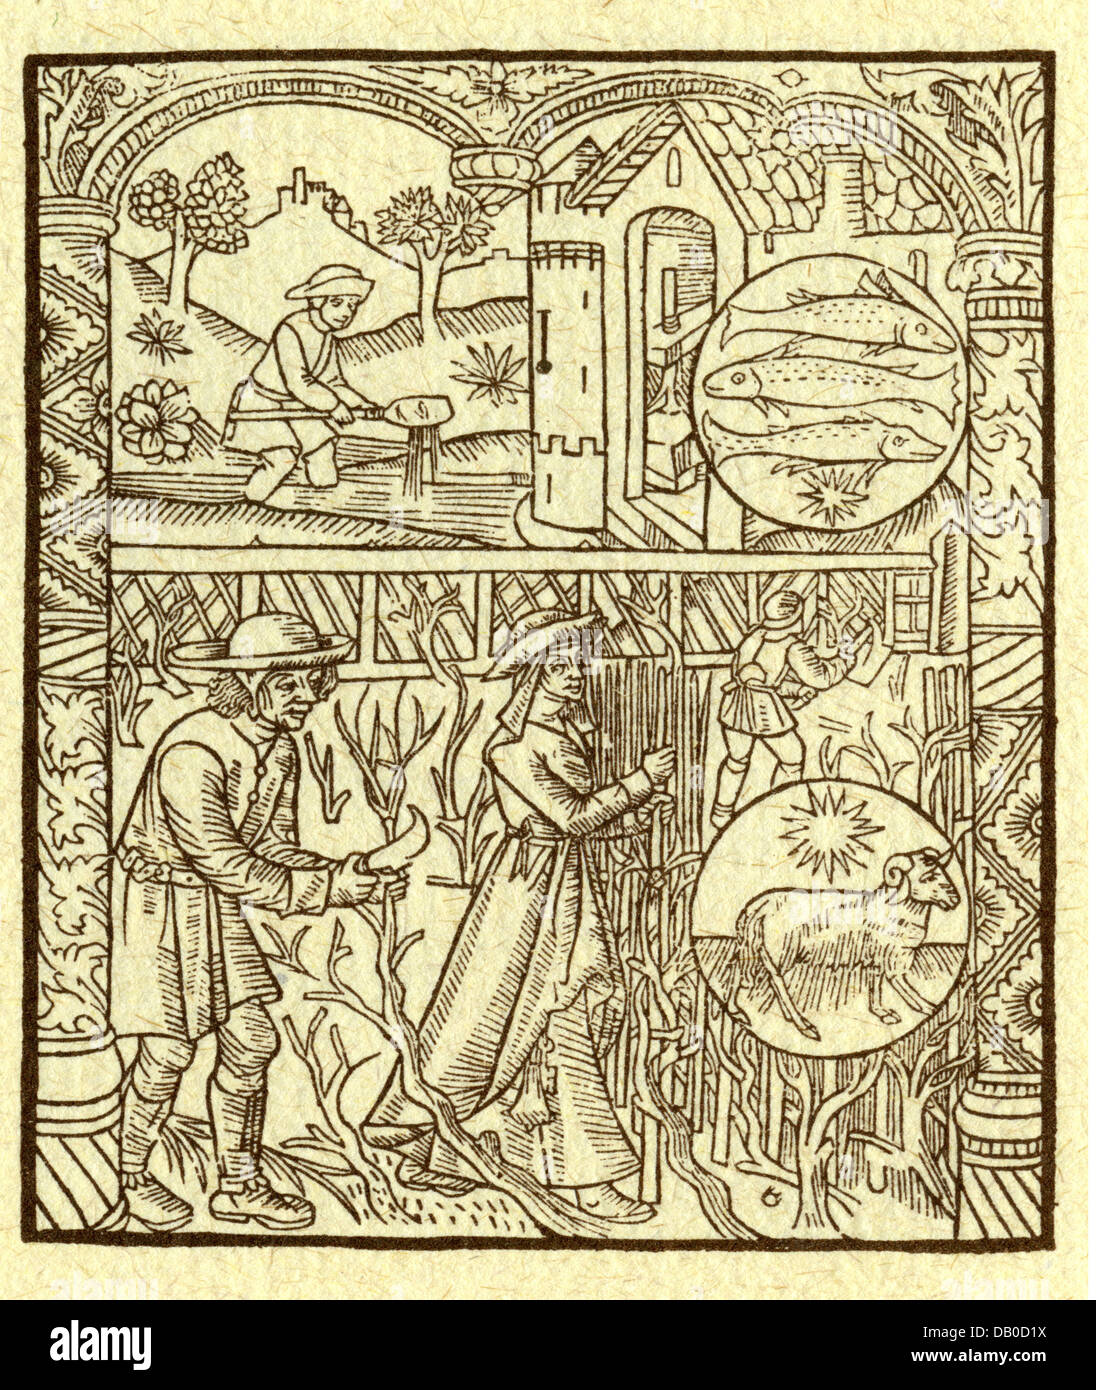 calendarium / calendars, labours of the months, March, woodcut, France, 15th century, Pisces, Aries, sign, zodiac, month image, months, people, Middle Ages, historic, historical,spring, springtime, springtide, fisherman, fisher, fishermen, fishing, grape vine, grape vines, vine, vines, trimming, cutting shape, trim, cut, trimming, cutting, agriculture, farming, medieval, Additional-Rights-Clearences-Not Available Stock Photo